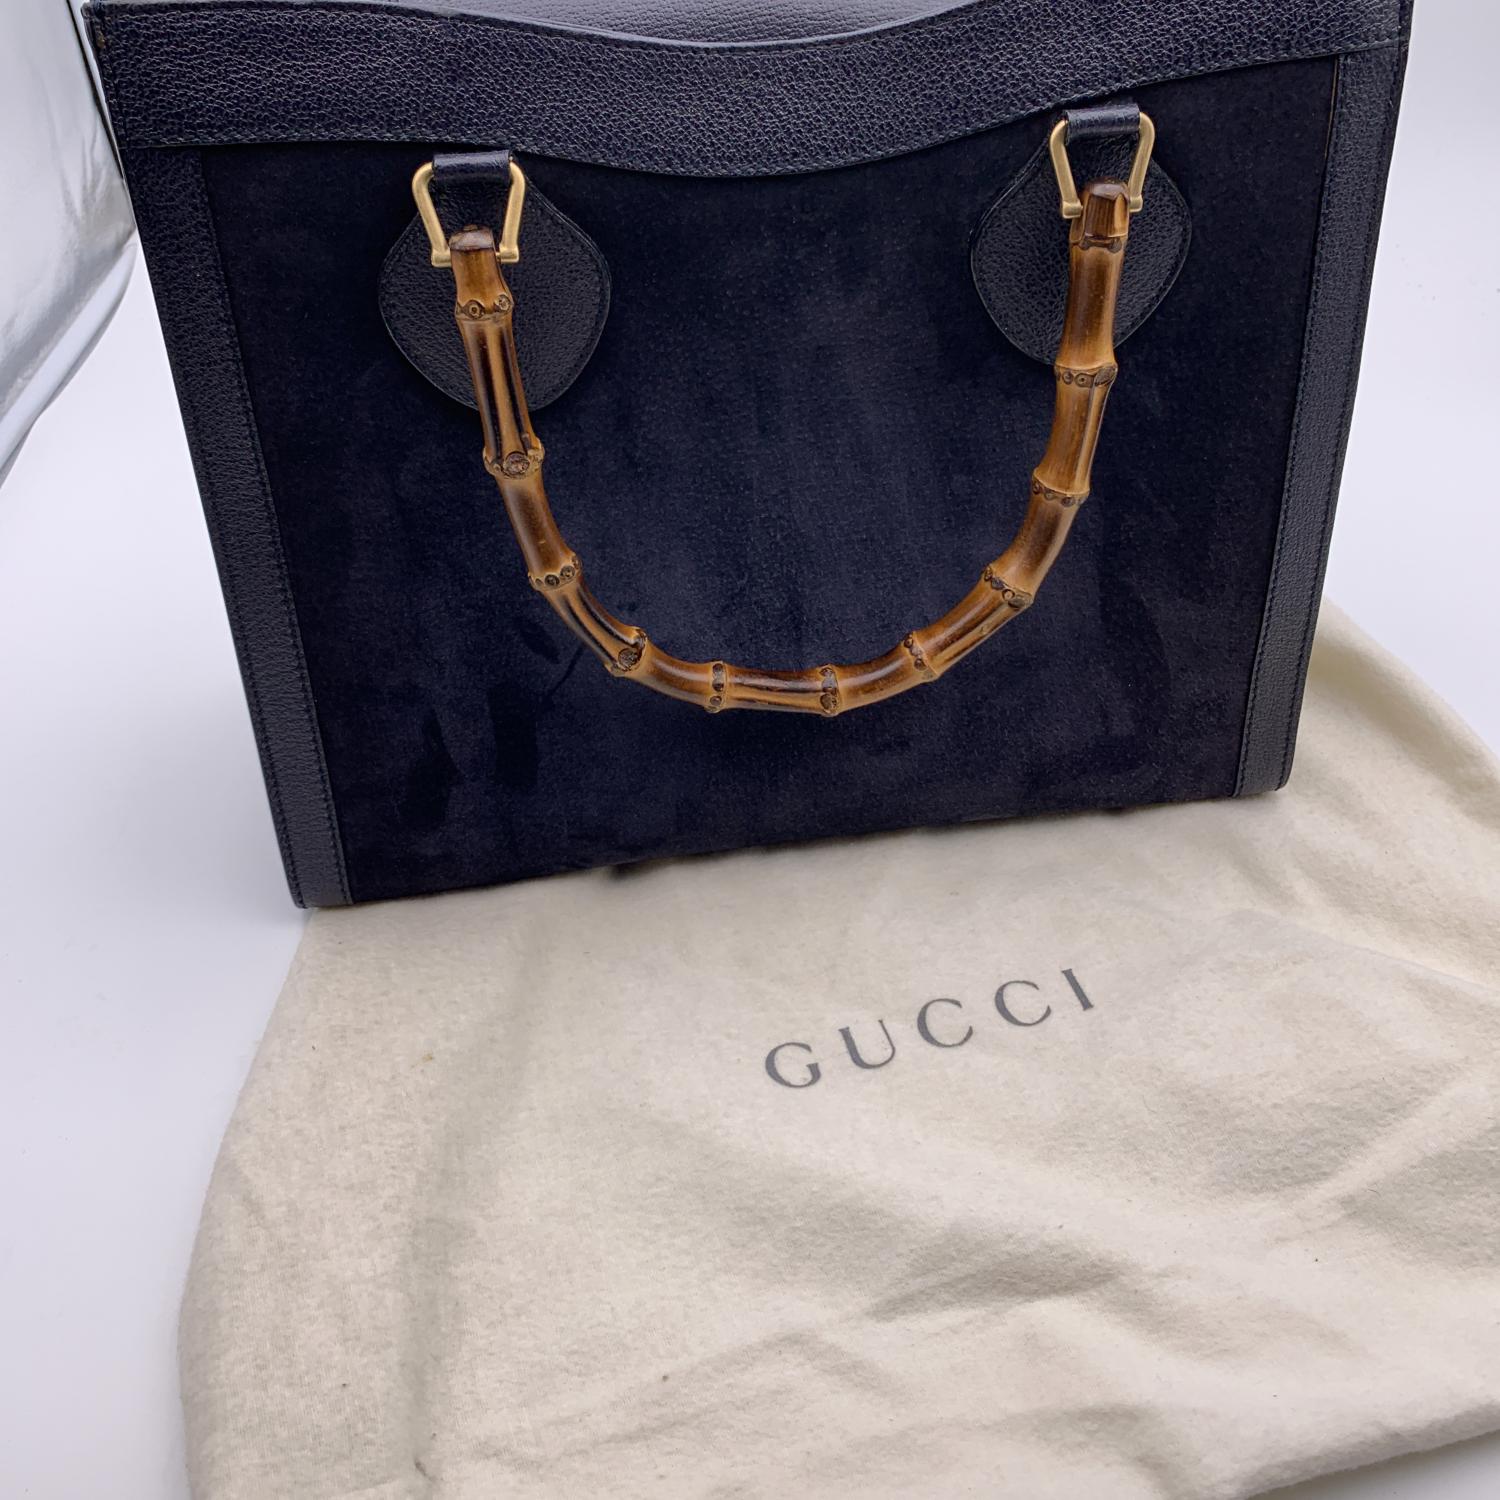 Beautiful Gucci Bamboo tote bag in blue suede with genuine leather trim. Double distinctive Bamboo handle. Princess Diana, was snapped carrying a this model on several occasions. Magnetic button closure on top. 5 bottom feet. Gold metal hardware. 1